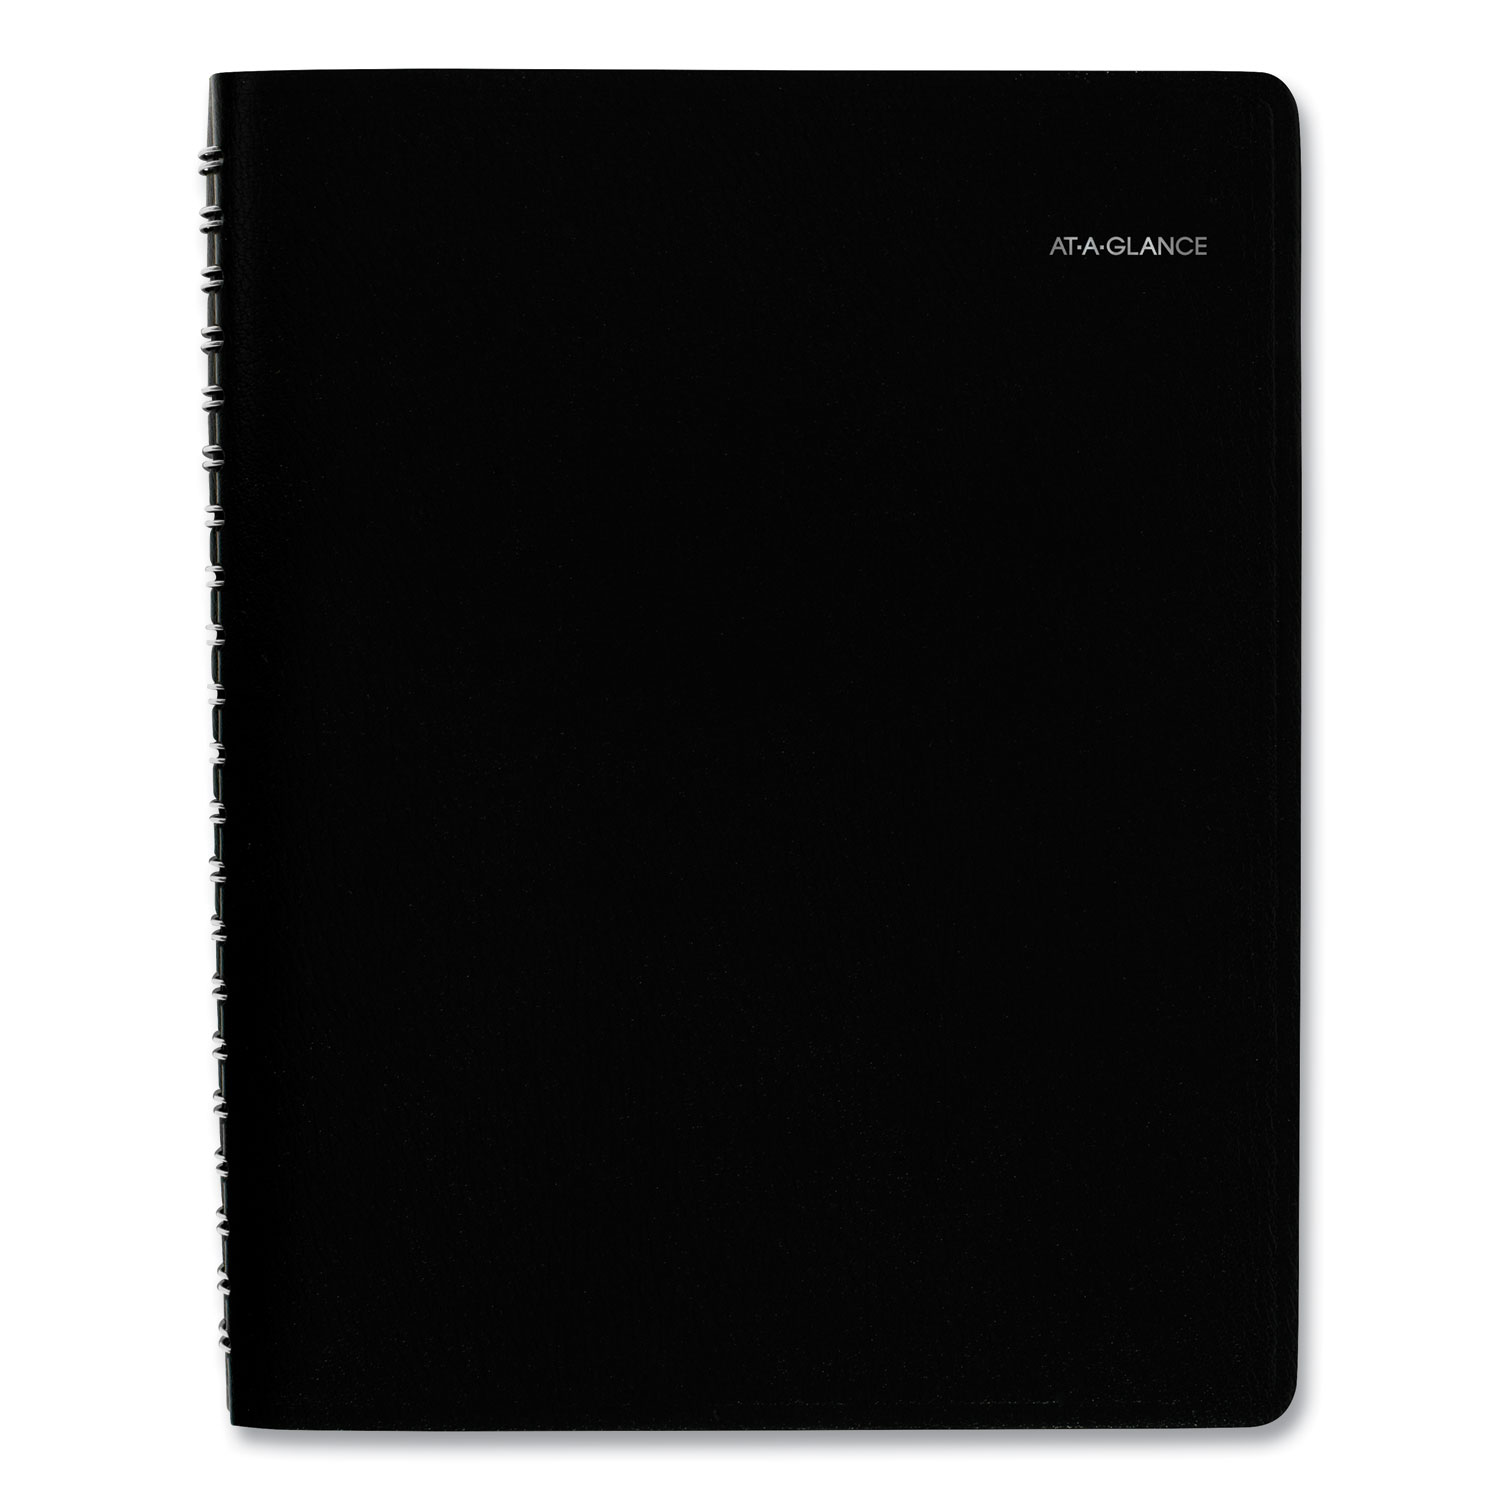  AT-A-GLANCE G560-00 Four-Person Group Daily Appointment Book, 11 x 7 7/8, Black, 2020 (AAGG56000) 